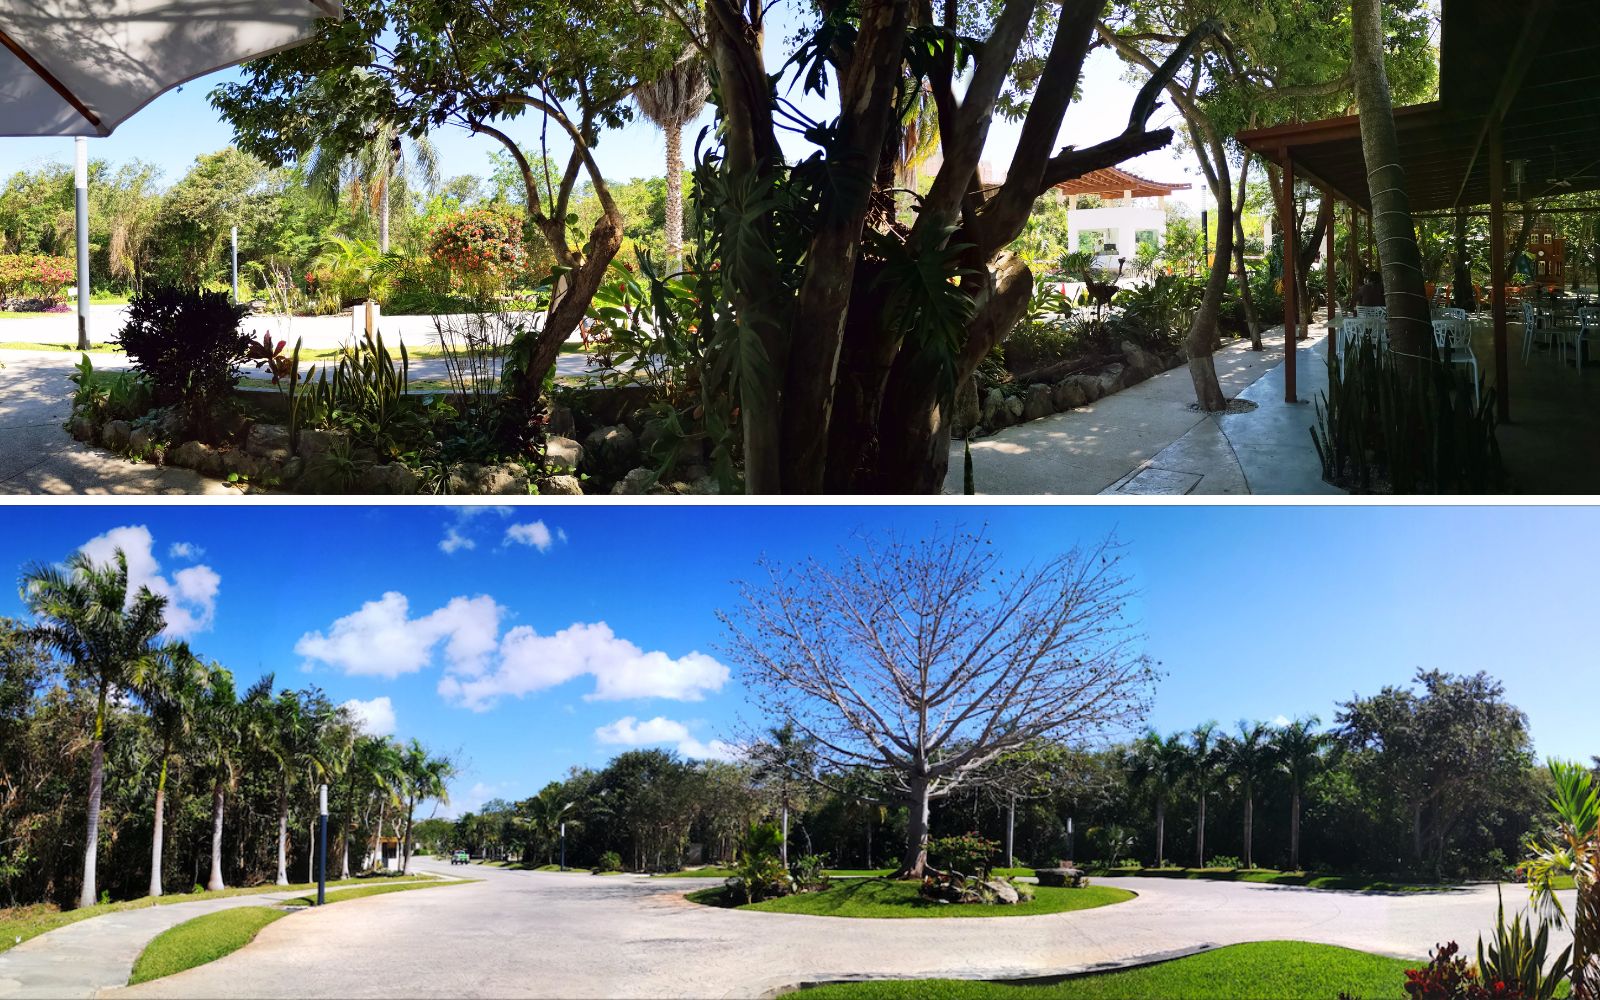 636 m2 lot, in gated community with private cenote, for sale Playa del Carmen.